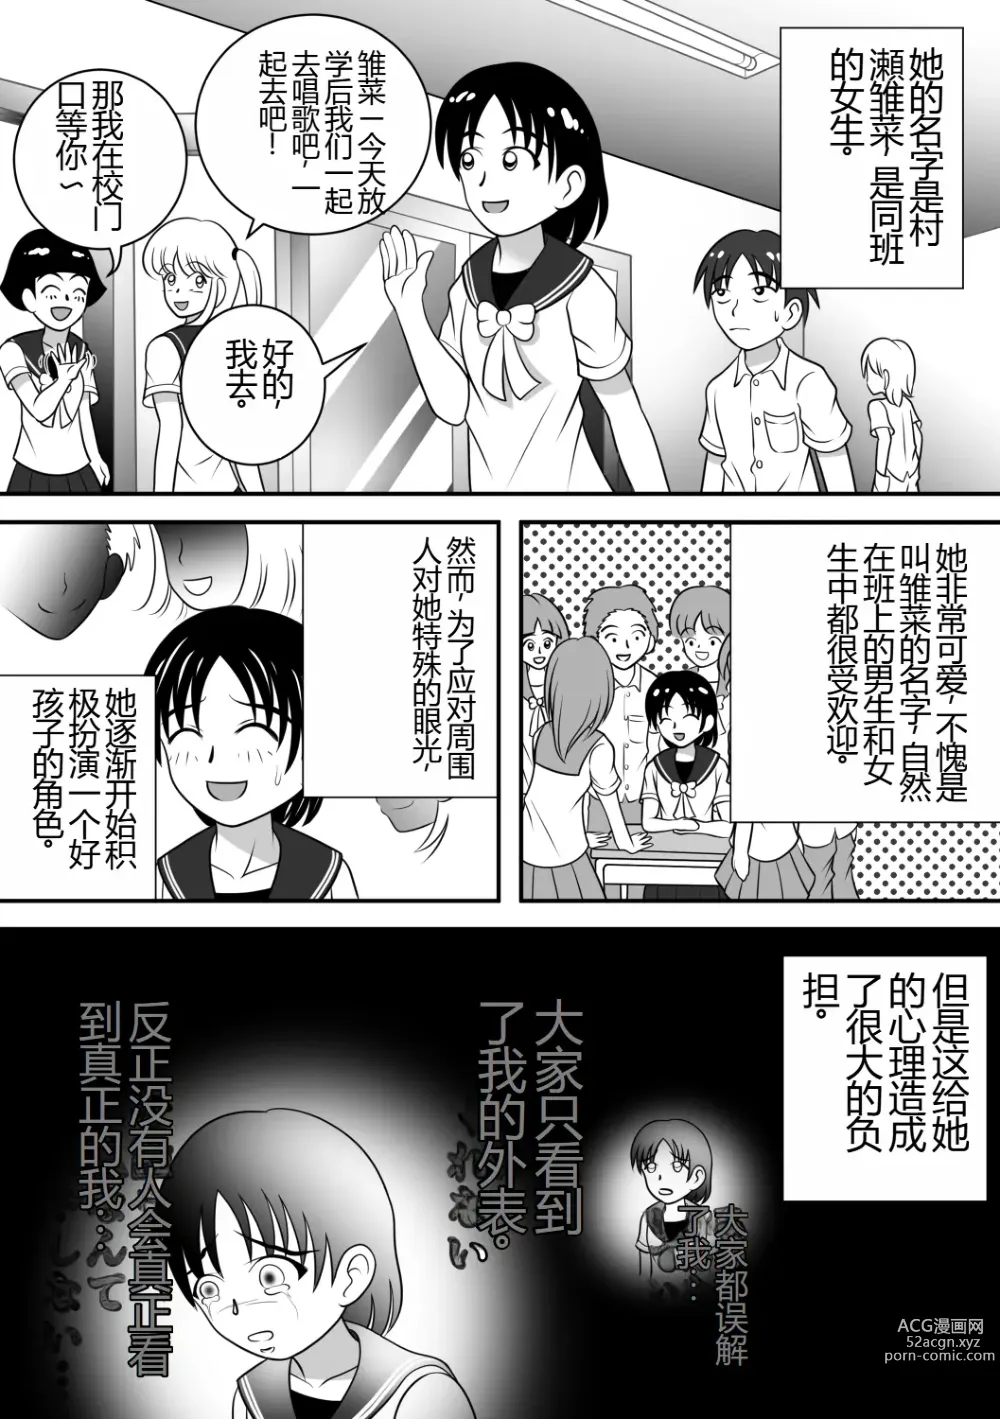 Page 4 of doujinshi 毫无保留的女孩